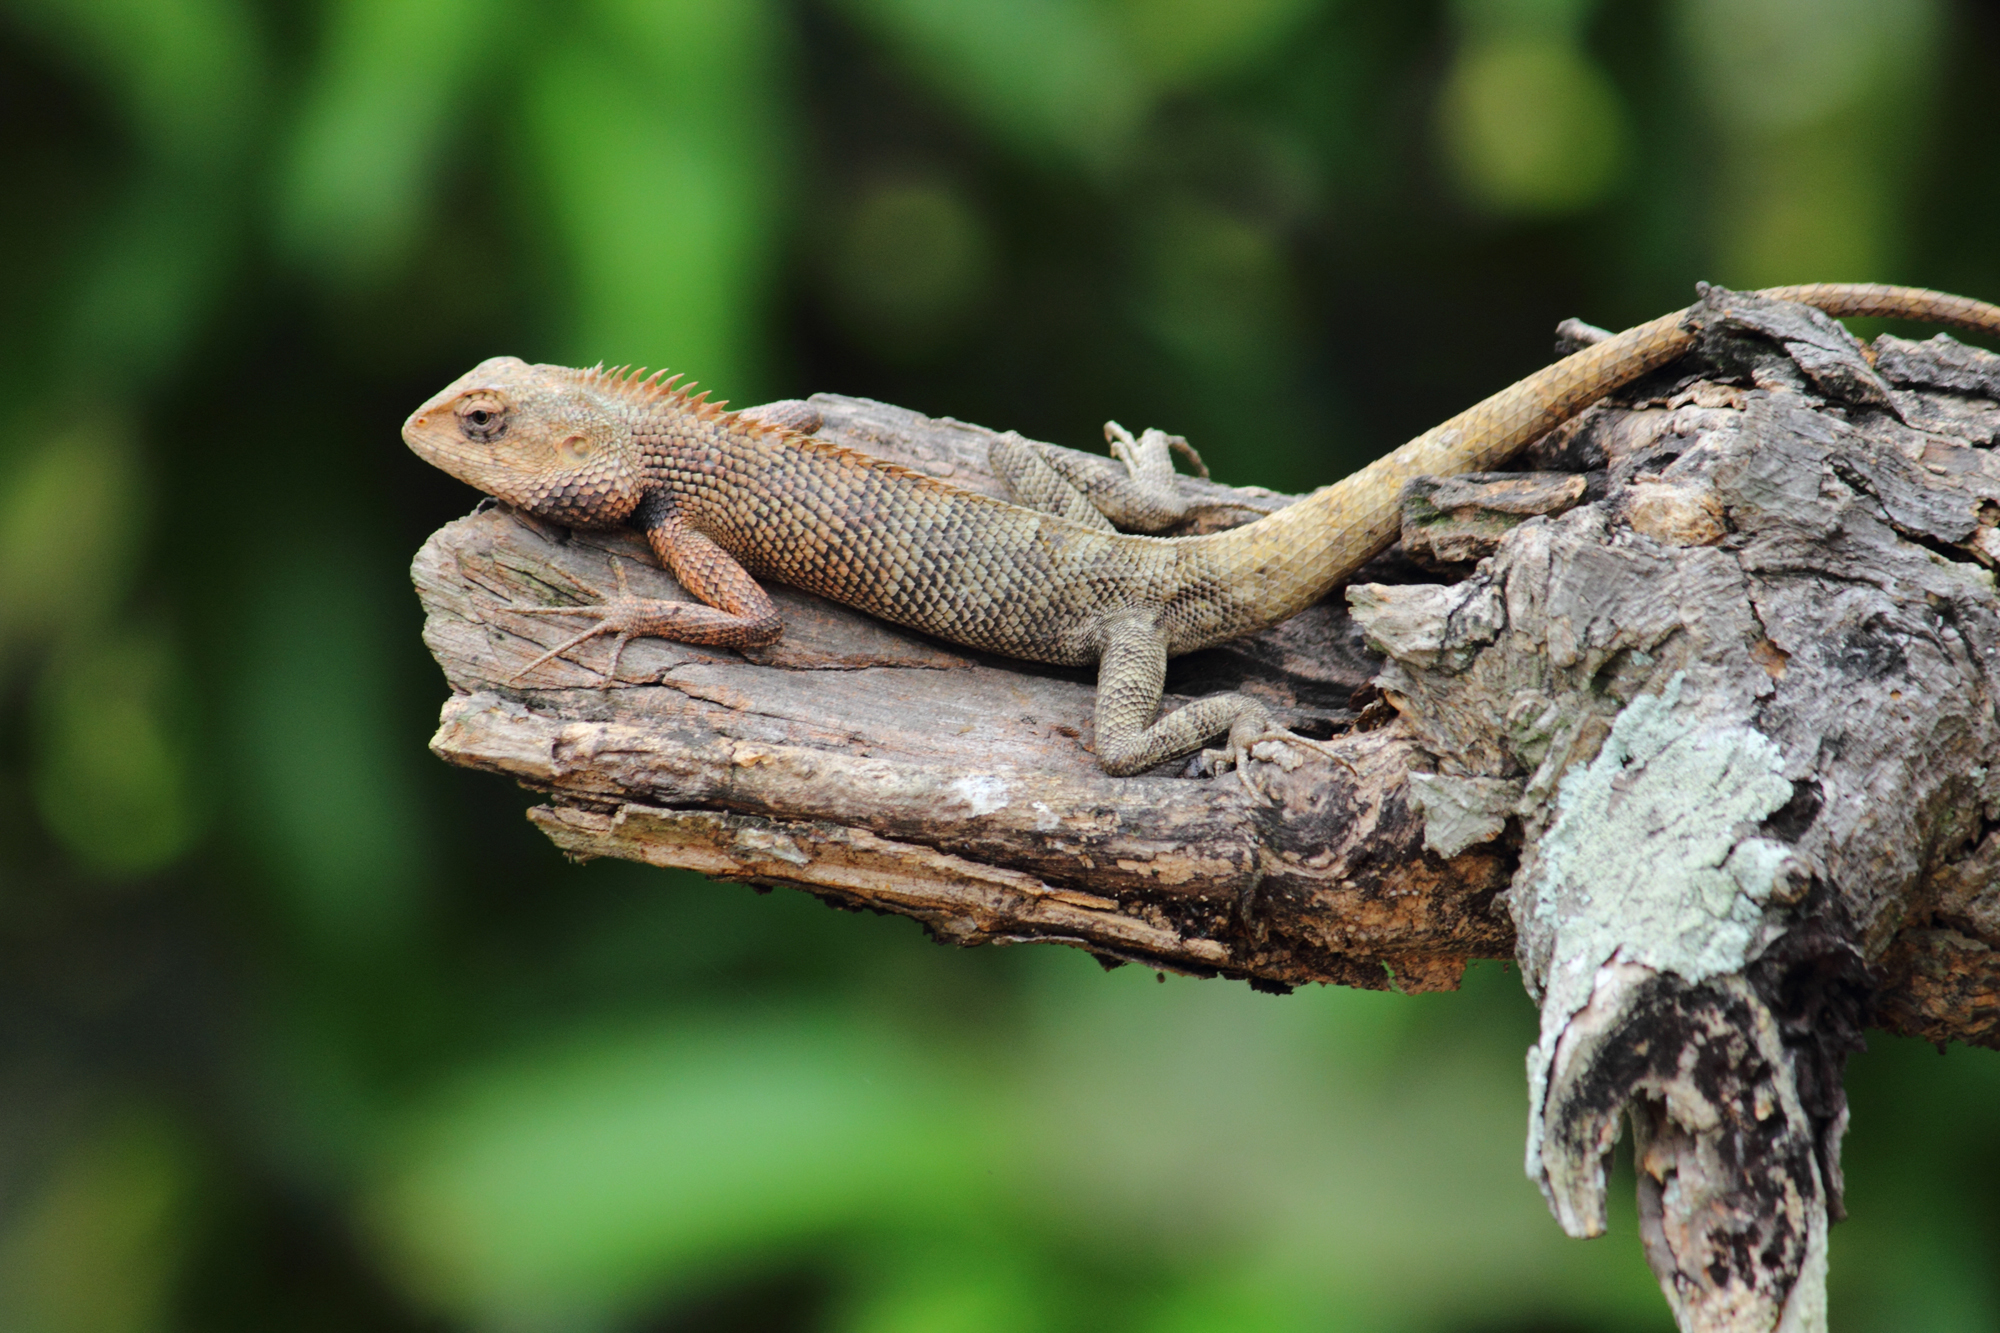 Here are some interesting chameleon things you may not have heard yet